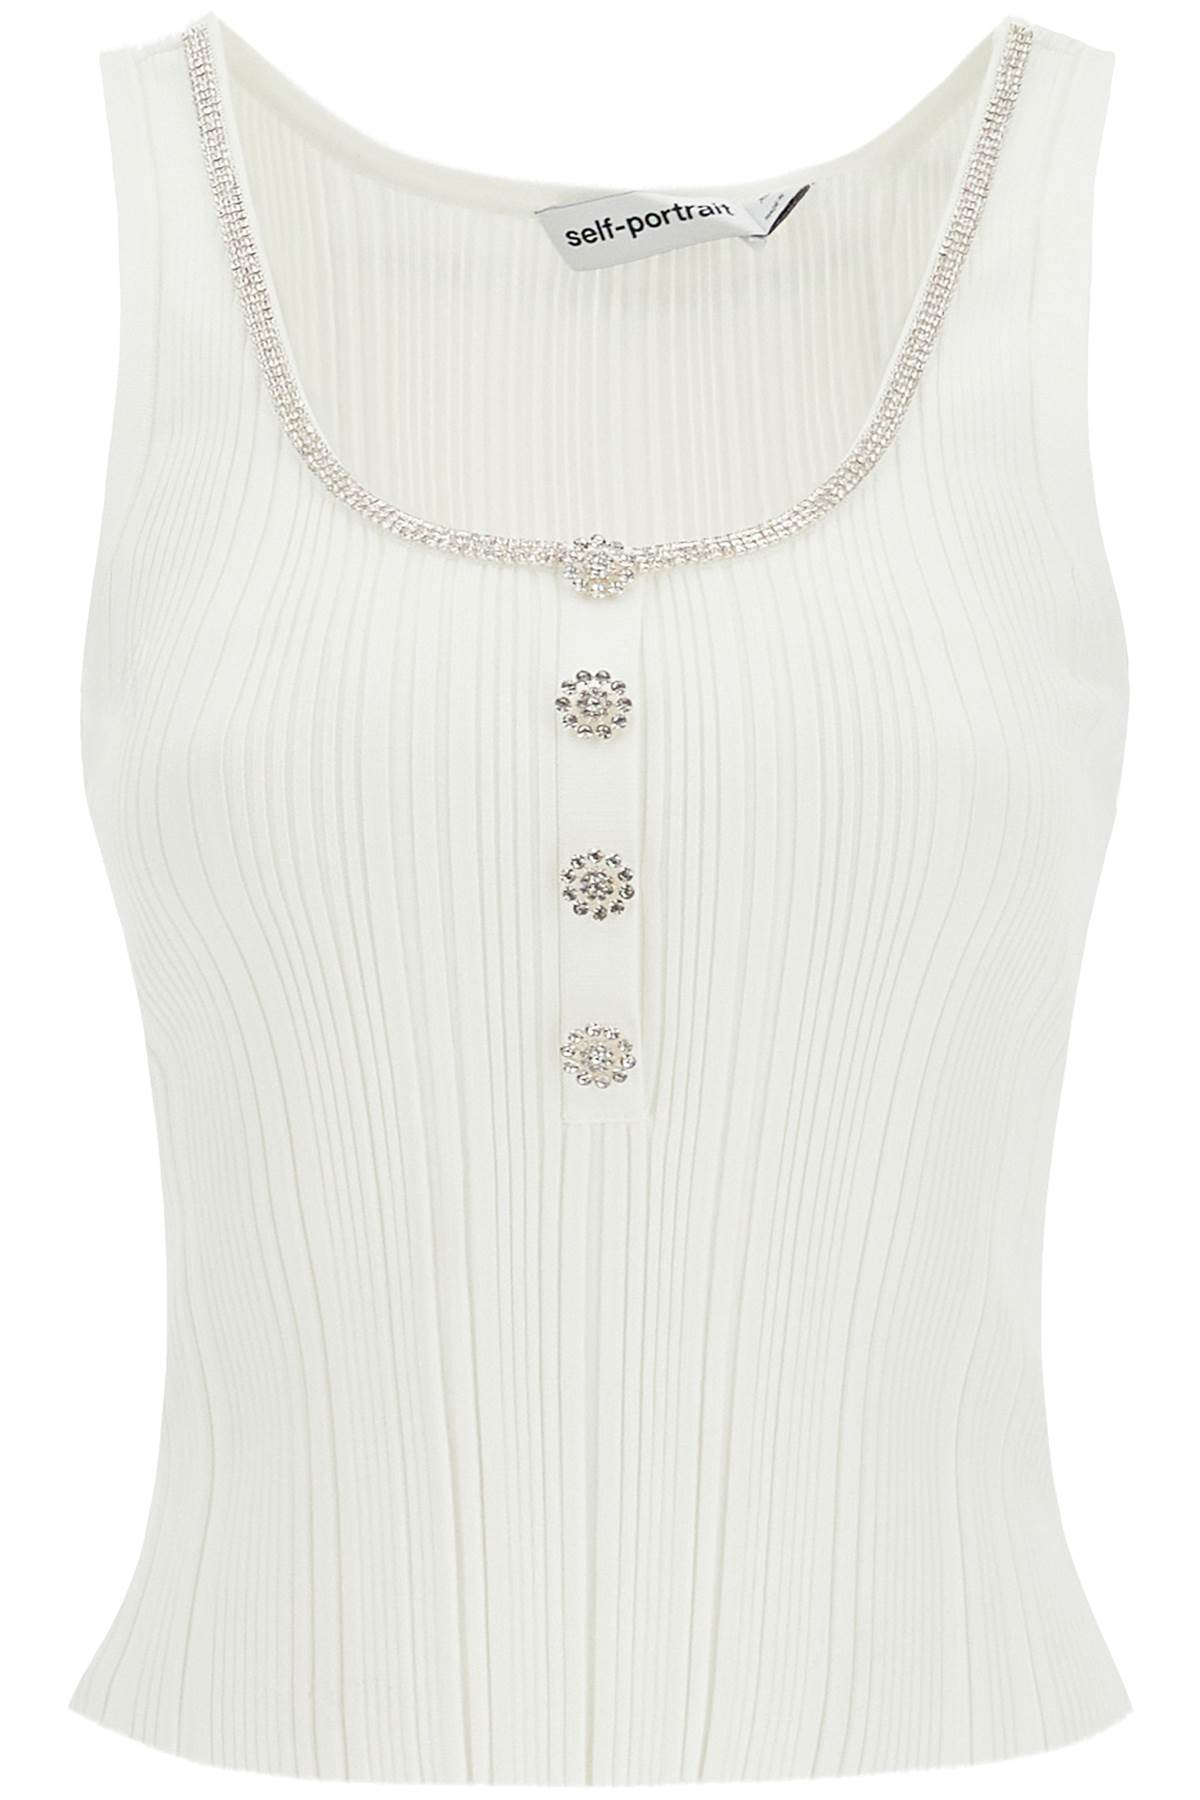 Shop Self-portrait "knit Top With Crystals Embell In White